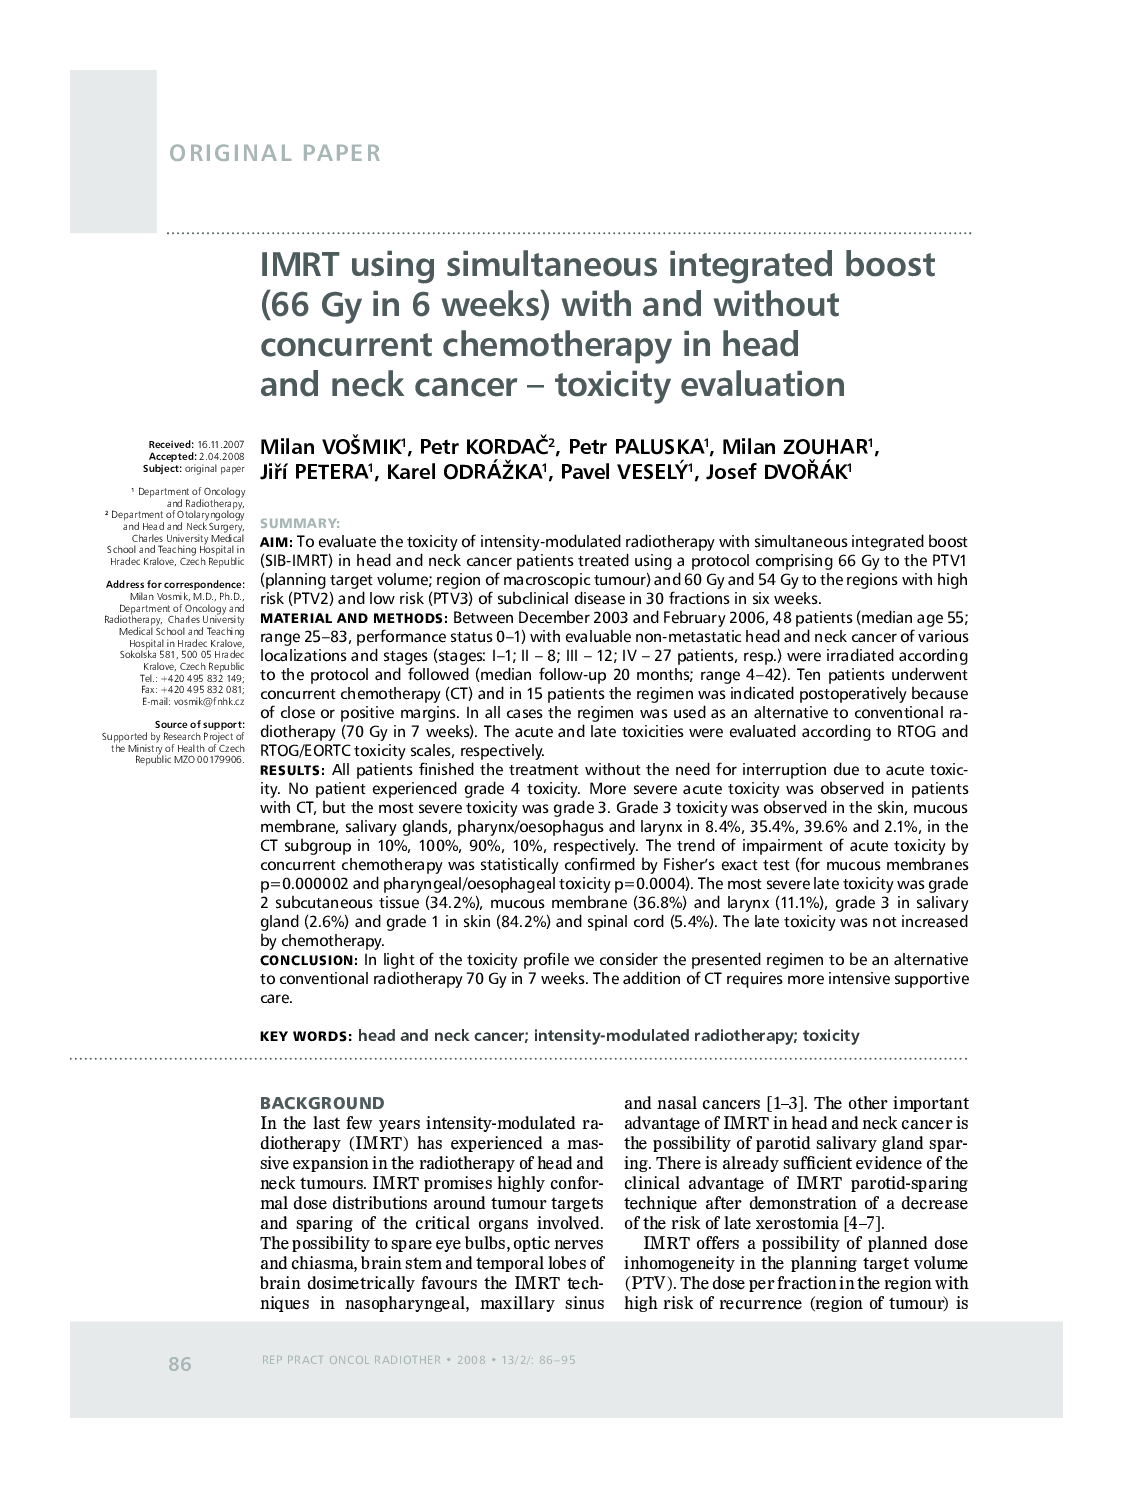 IMRT using simultaneous integrated boost (66 Gy in 6 weeks) with and without concurrent chemotherapy in head and neck cancer – toxicity evaluation 